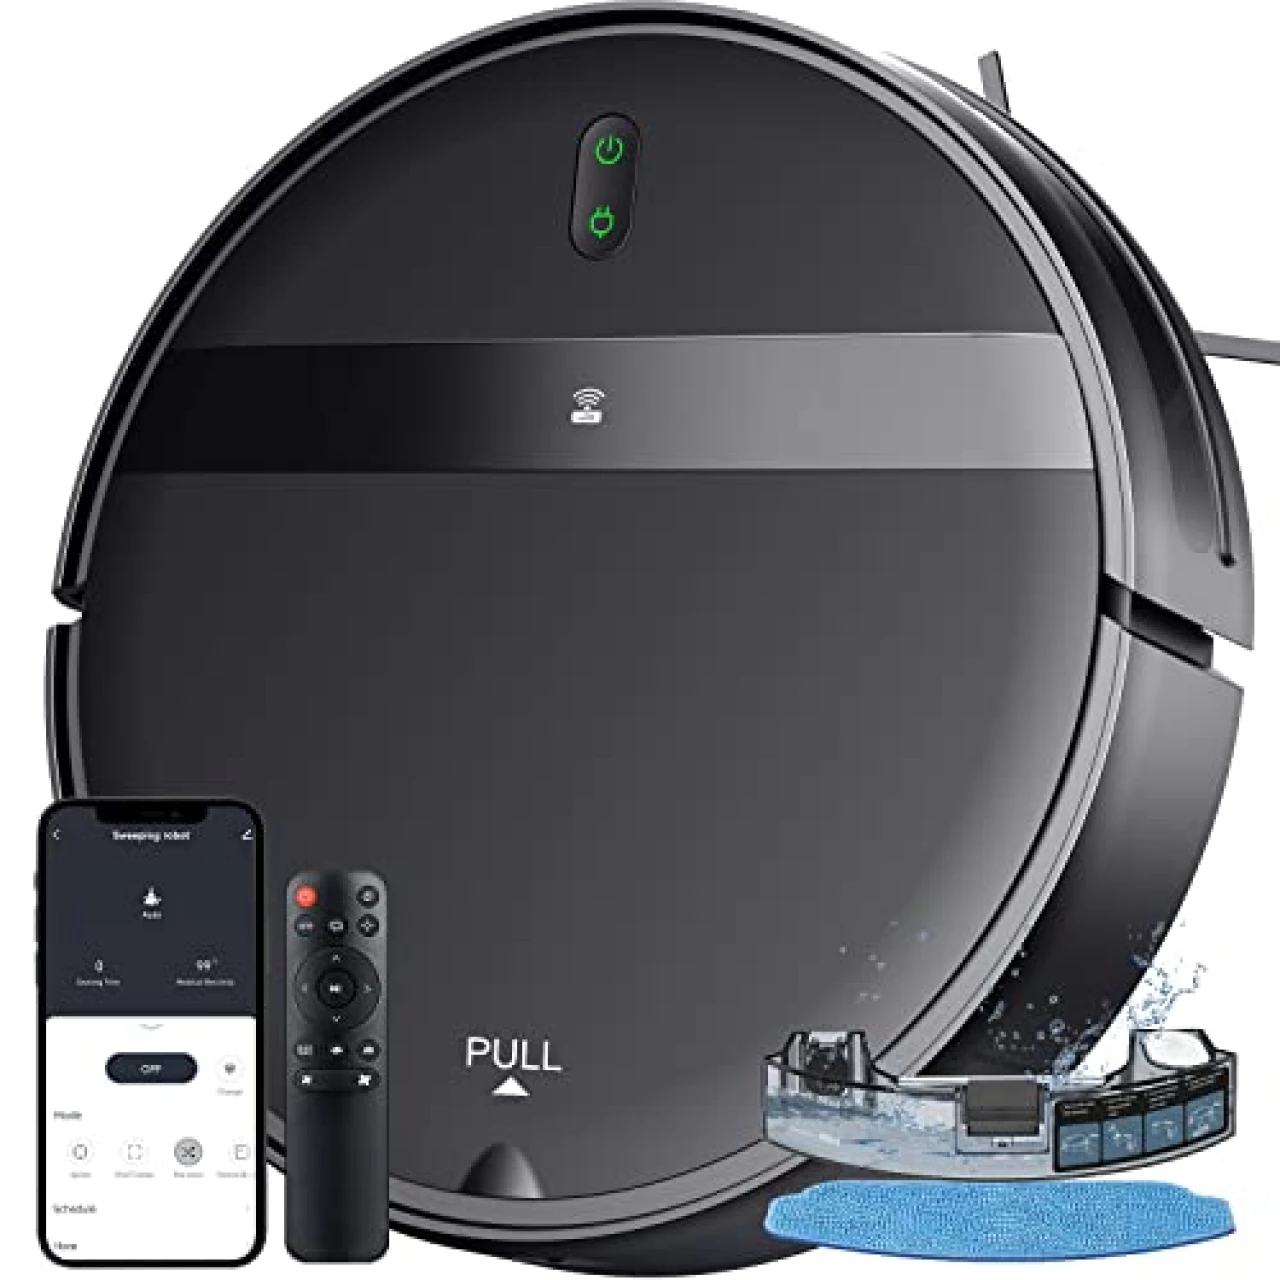 MANVINS Robot Vacuum and Mop Combo, App/Alexa, Robotic Vacuum with WiFi/Bluetooth, Self-Charging Mopping Robot Vacuum Cleaner, Set Schedule, Max Strong Suction Ideal for Pet Hair